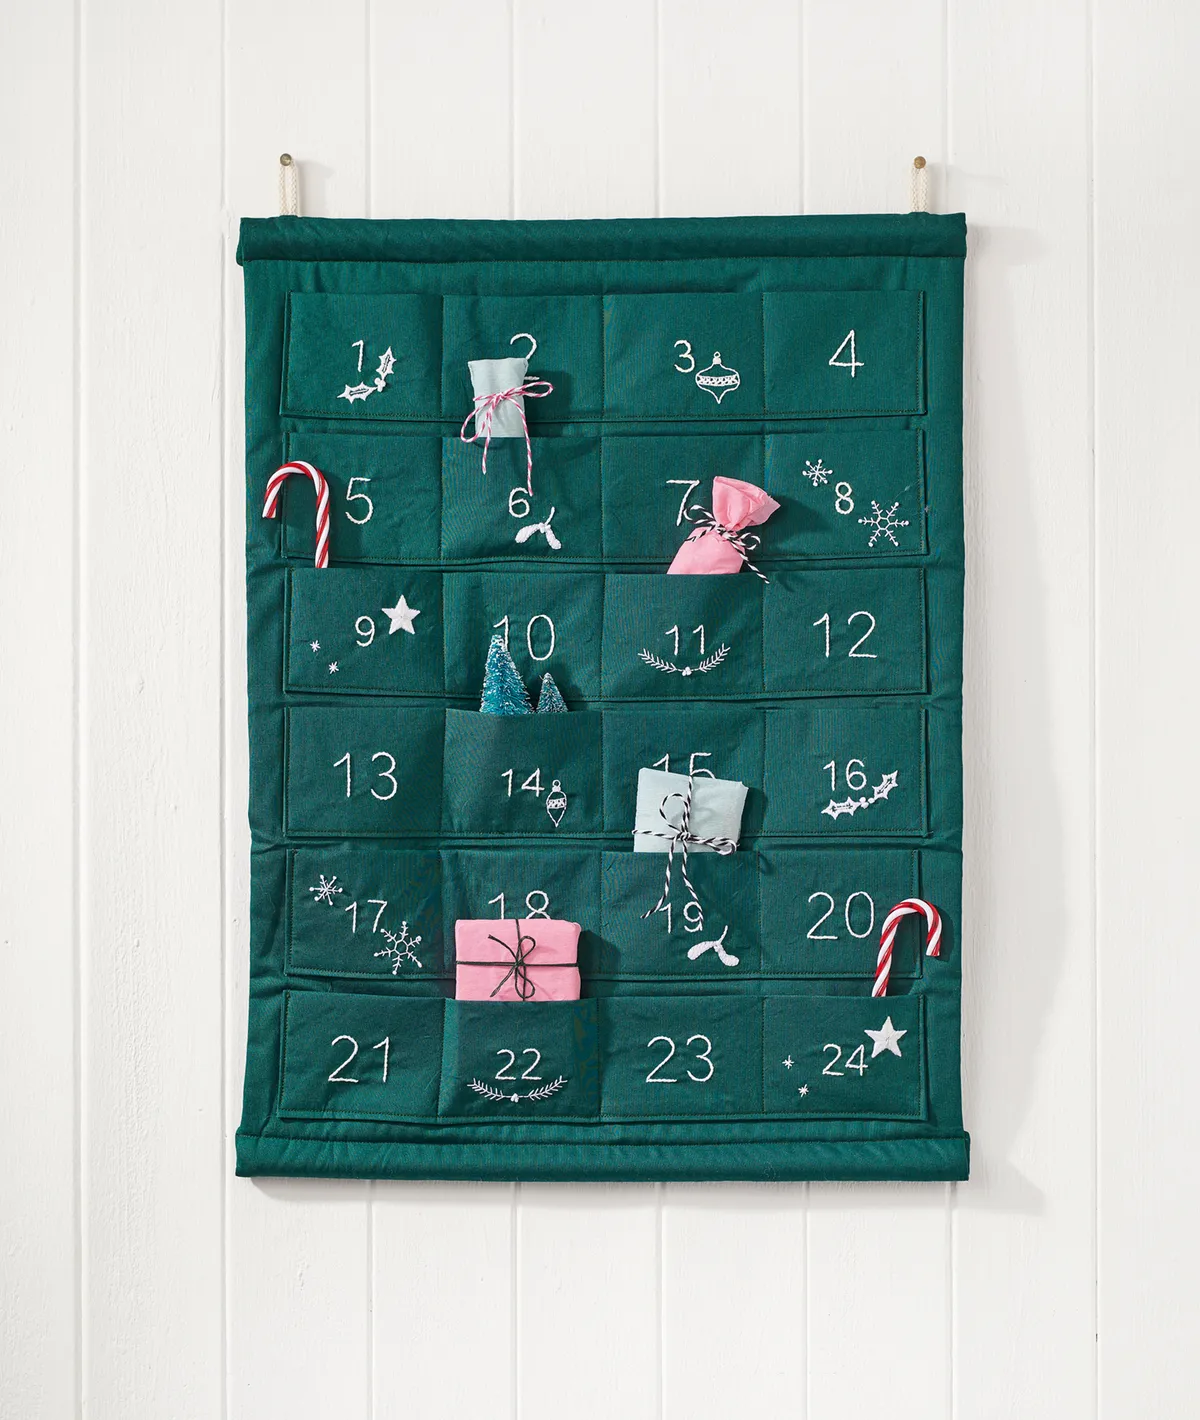 Handsewn green advent calendar with embroidered numbers and festive motifs